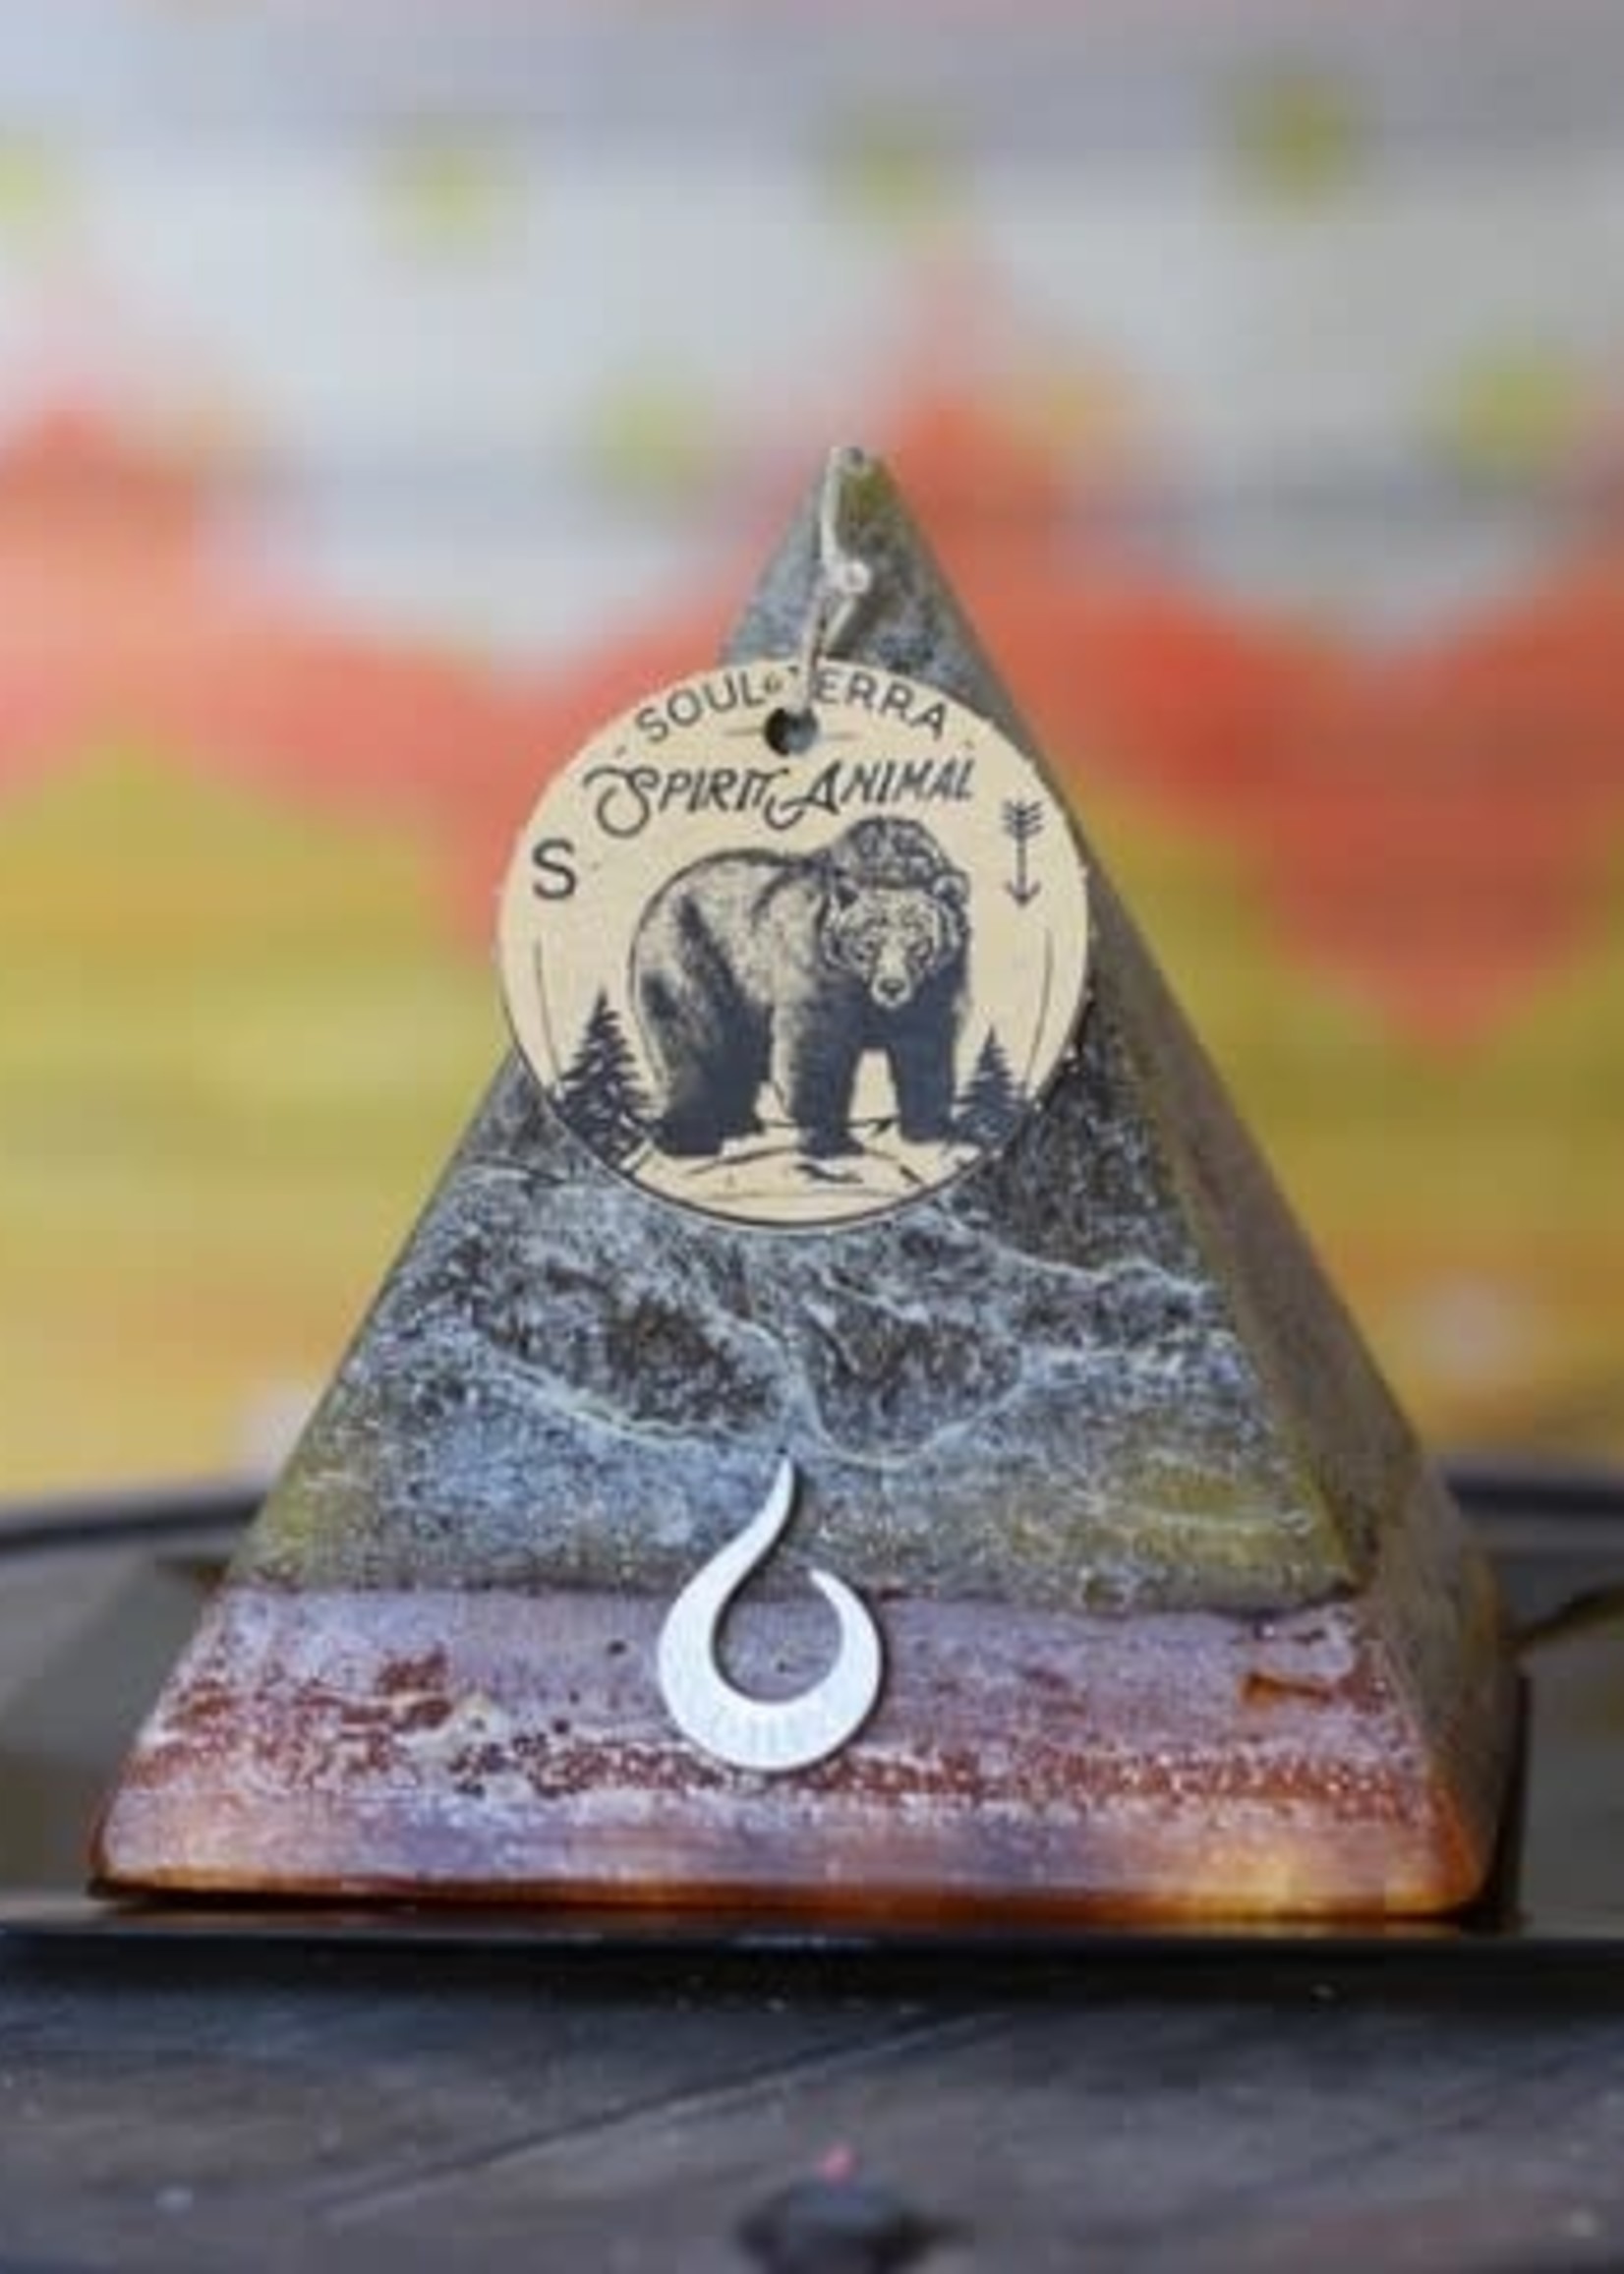 SoulTerra Pyramid Candles - Spirit of the Wild Candle